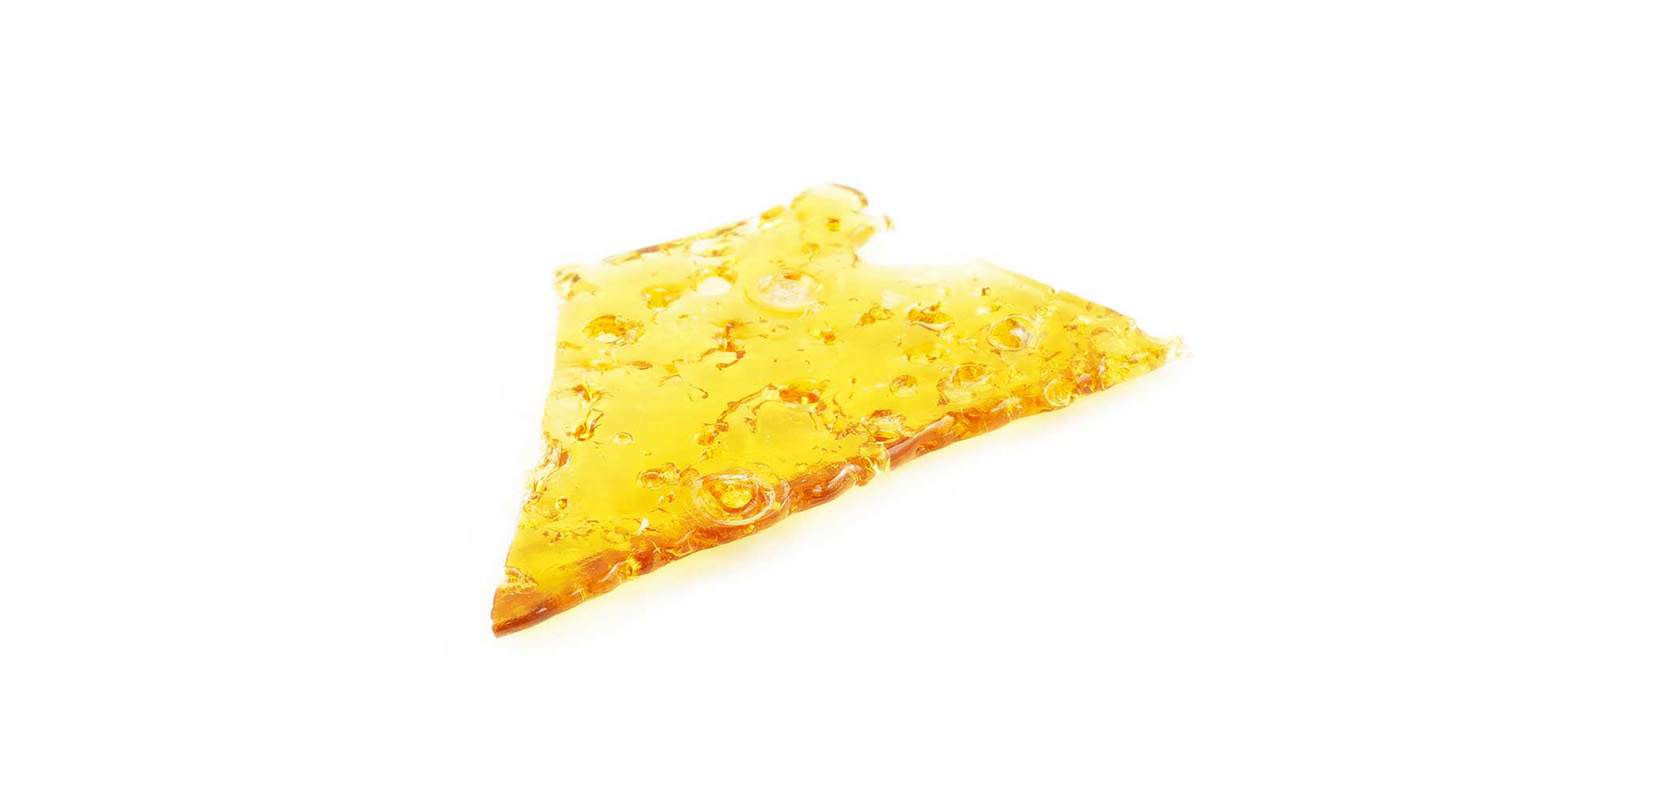 Death Bubba shatter weed concentrate dab drug from wccannabis dispensary for cannabis concentrates in Canada. online dispensary. buy weed.